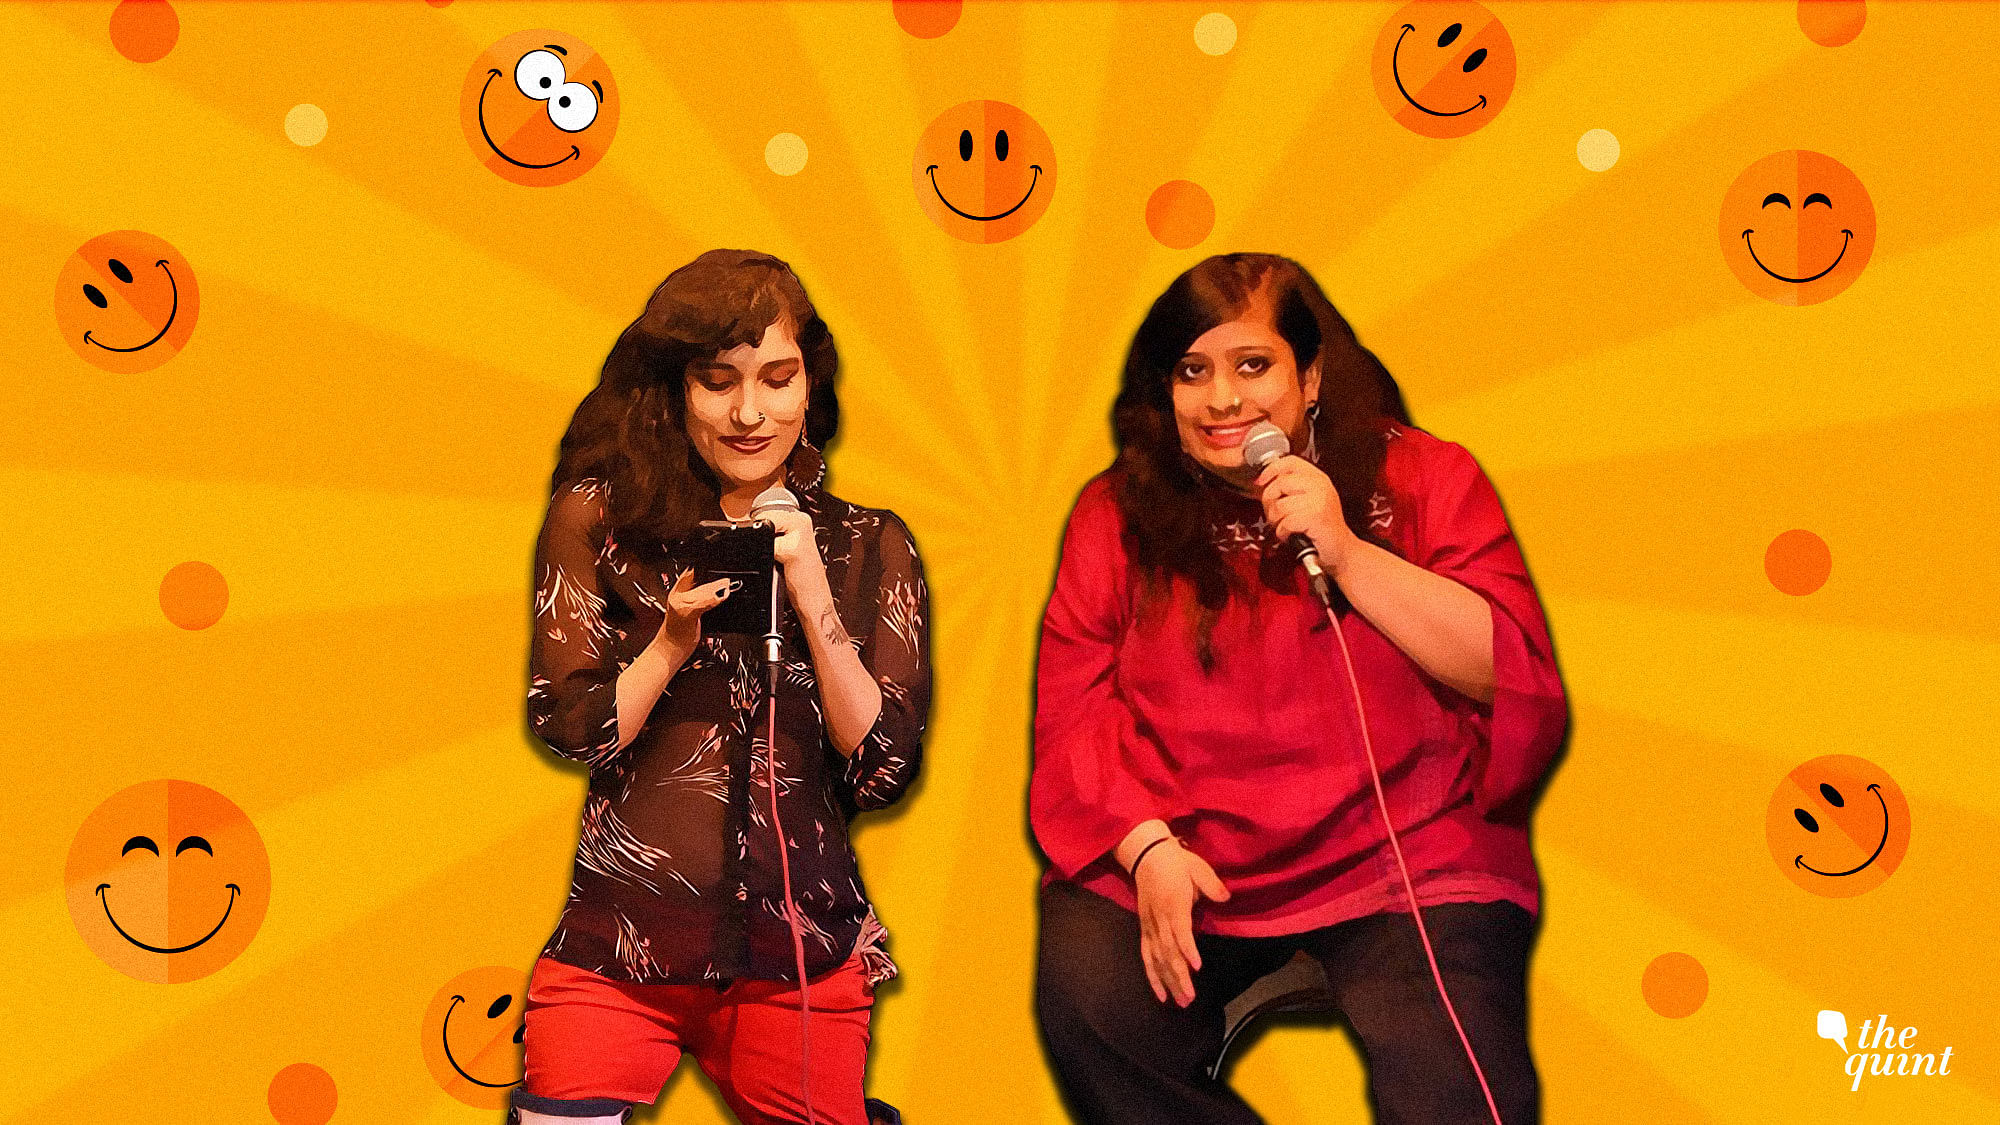 Meet Shivangi Agrawal and Sweta Mantrii and  their own version of stand-ups.